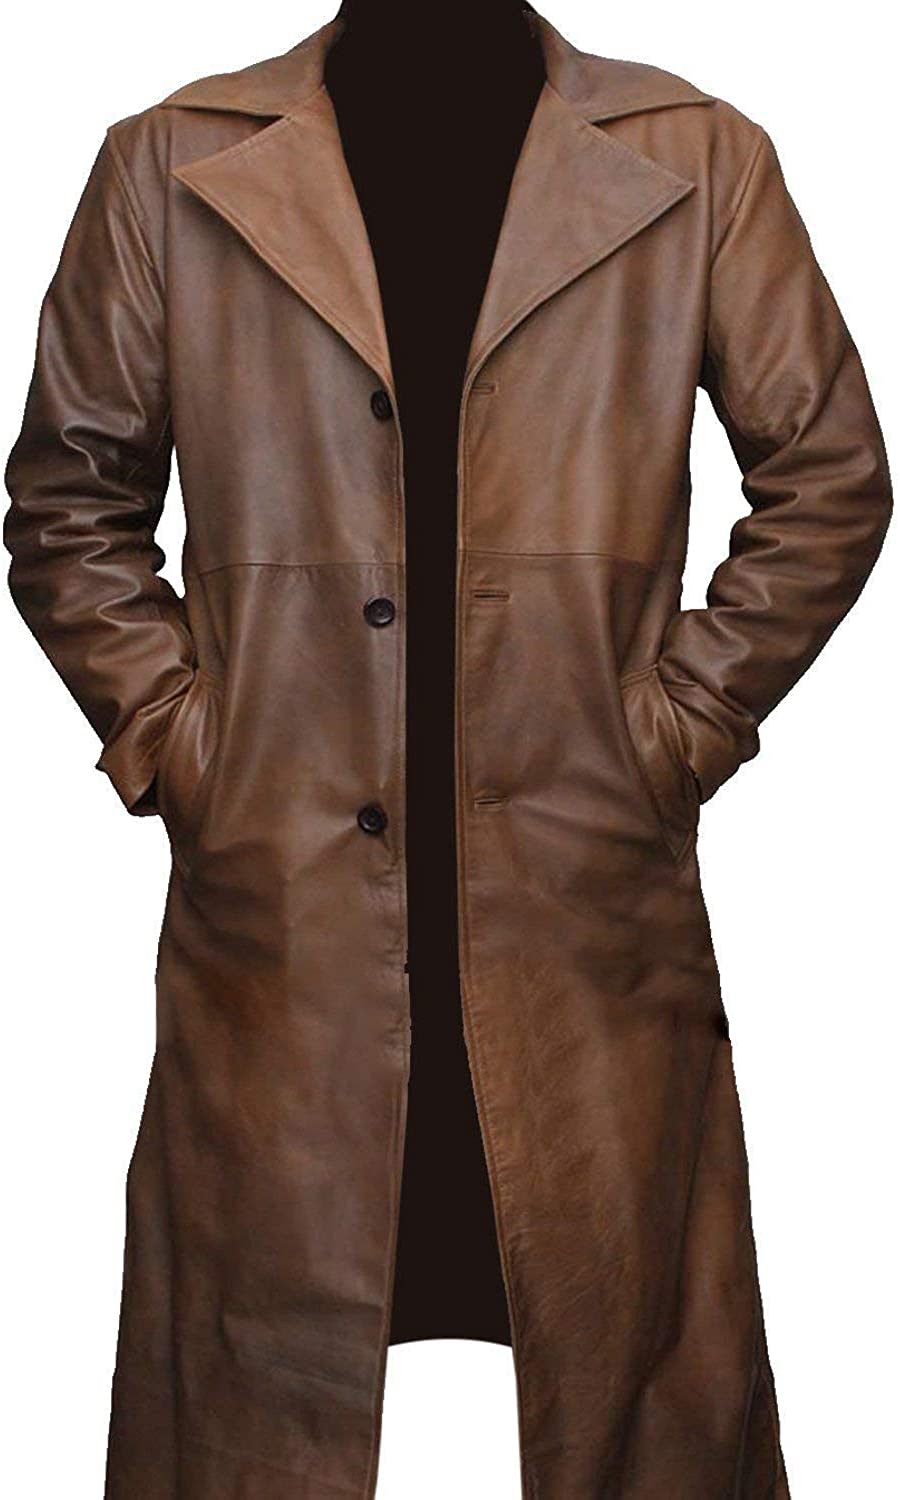 Knightmare Bruce Wayne Leather Coat - Color Jackets